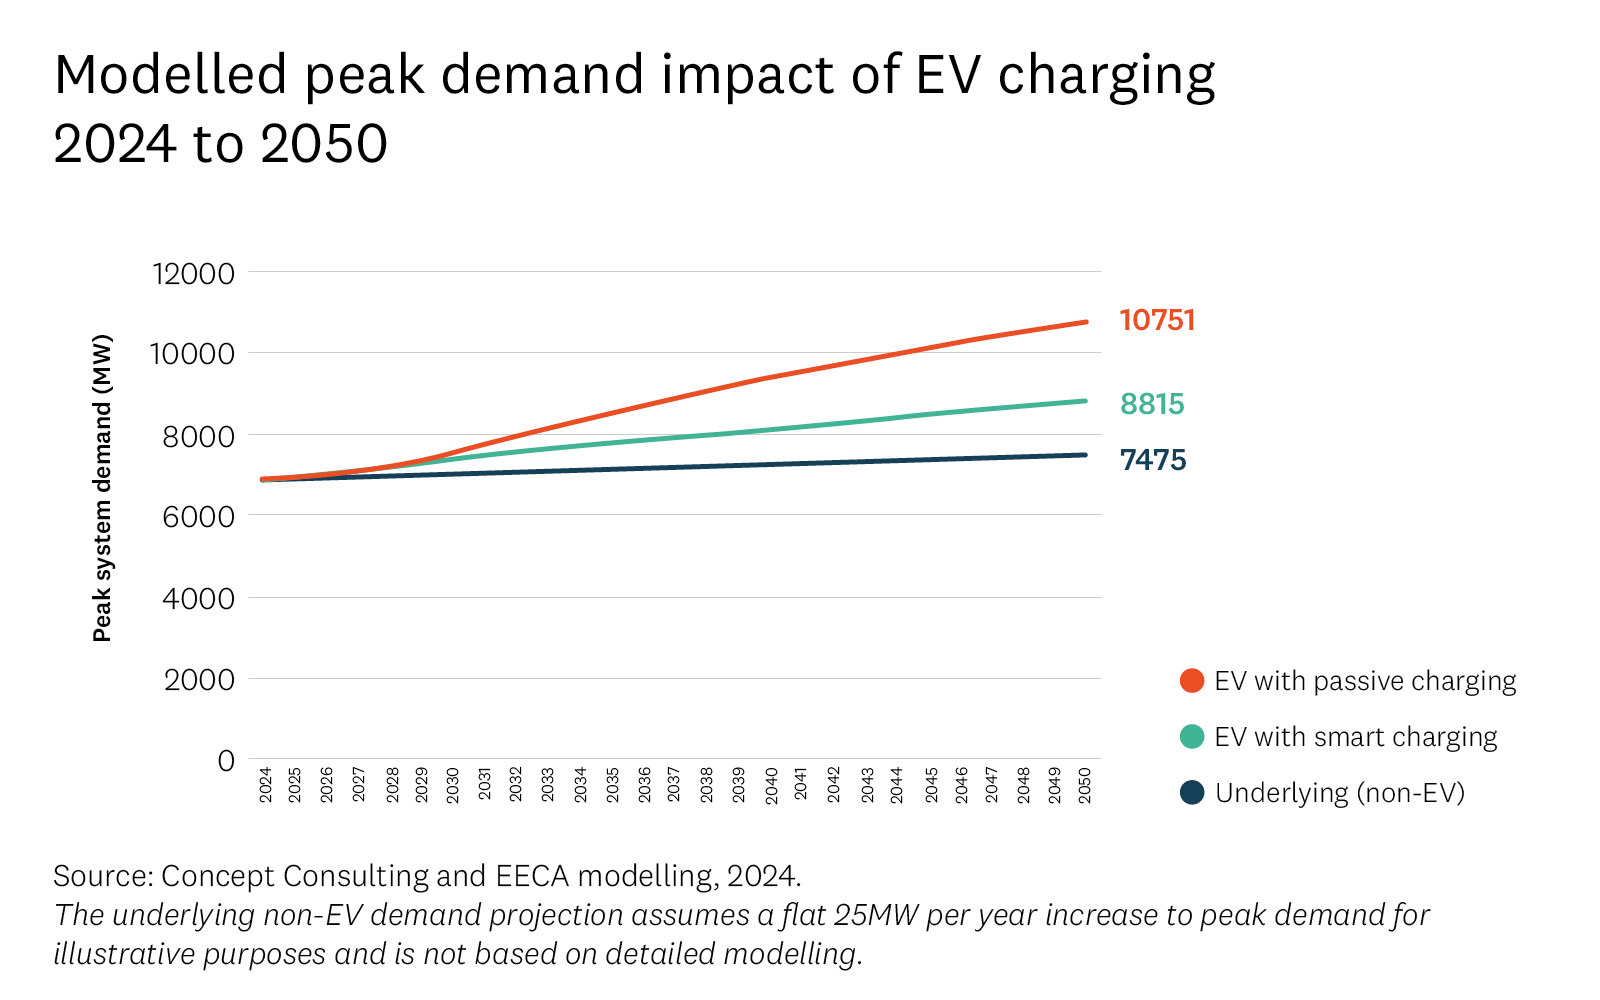 Line graph shows modelled peak demand in MW with passive and smart EV charging, 2024-2030. 